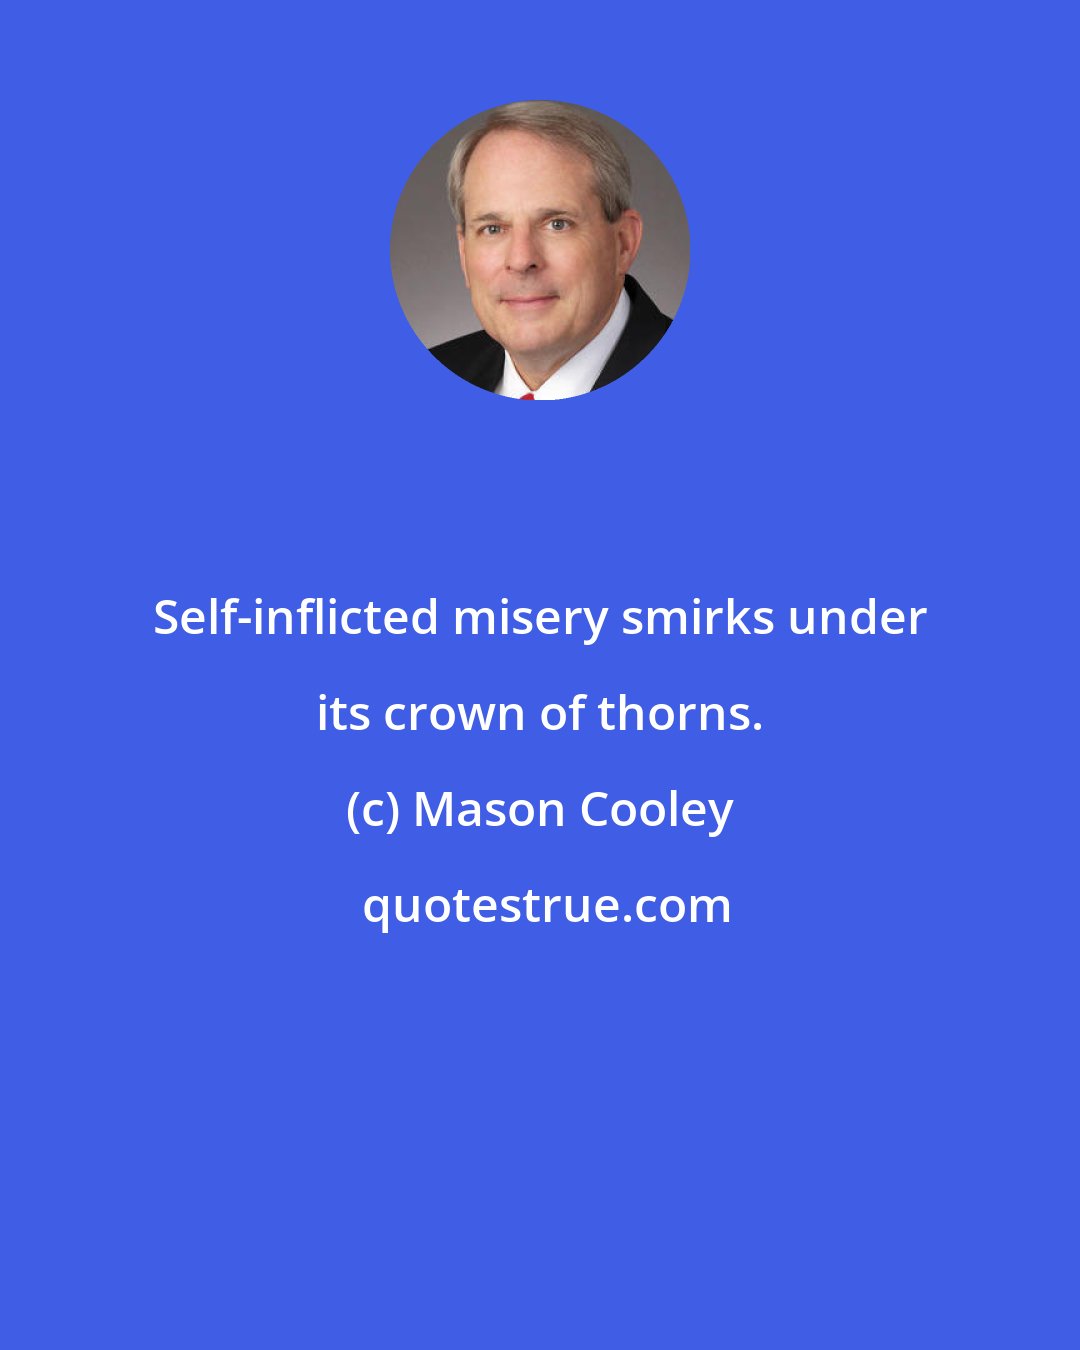 Mason Cooley: Self-inflicted misery smirks under its crown of thorns.